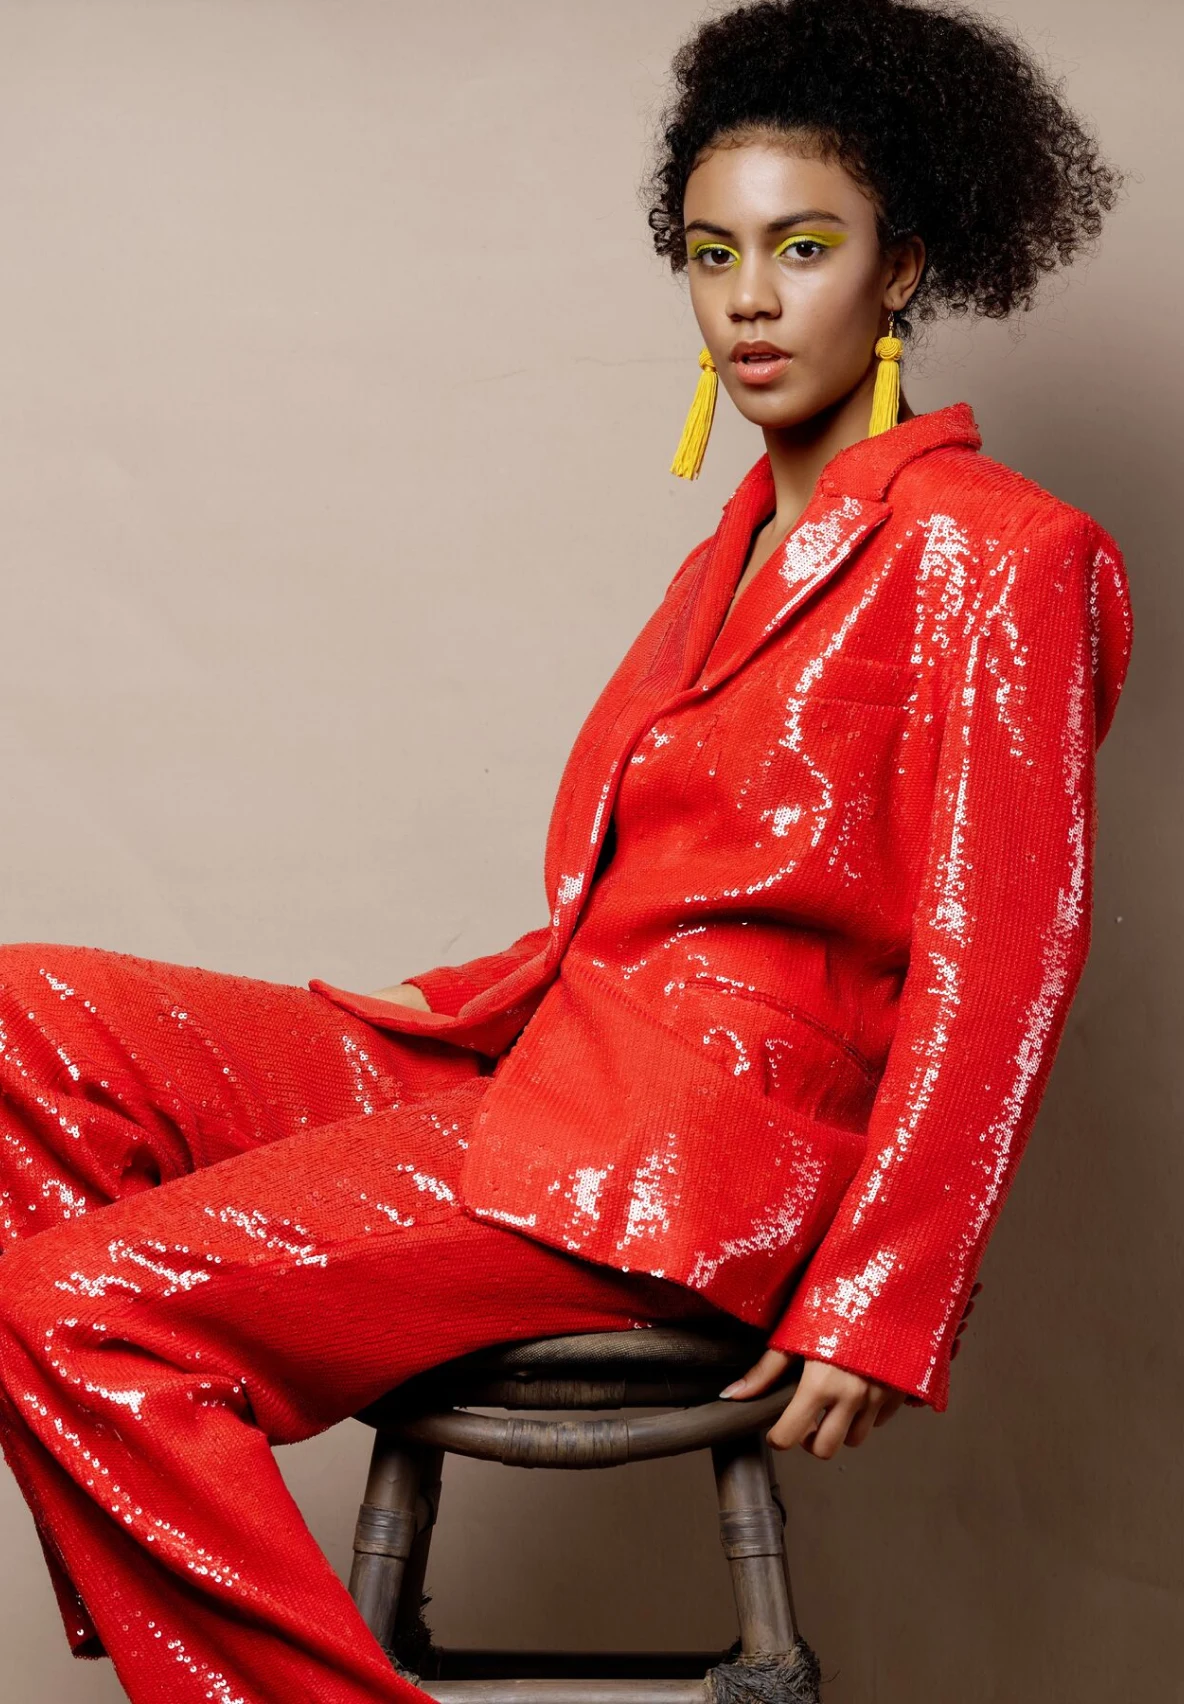 Image of a woman sitting on a wooden stool, wearing a red sequined suit. She is also dawning bright yellow dangling earrings and bright yellow liquid eyeshadow, with her hair up in a ponytail. 